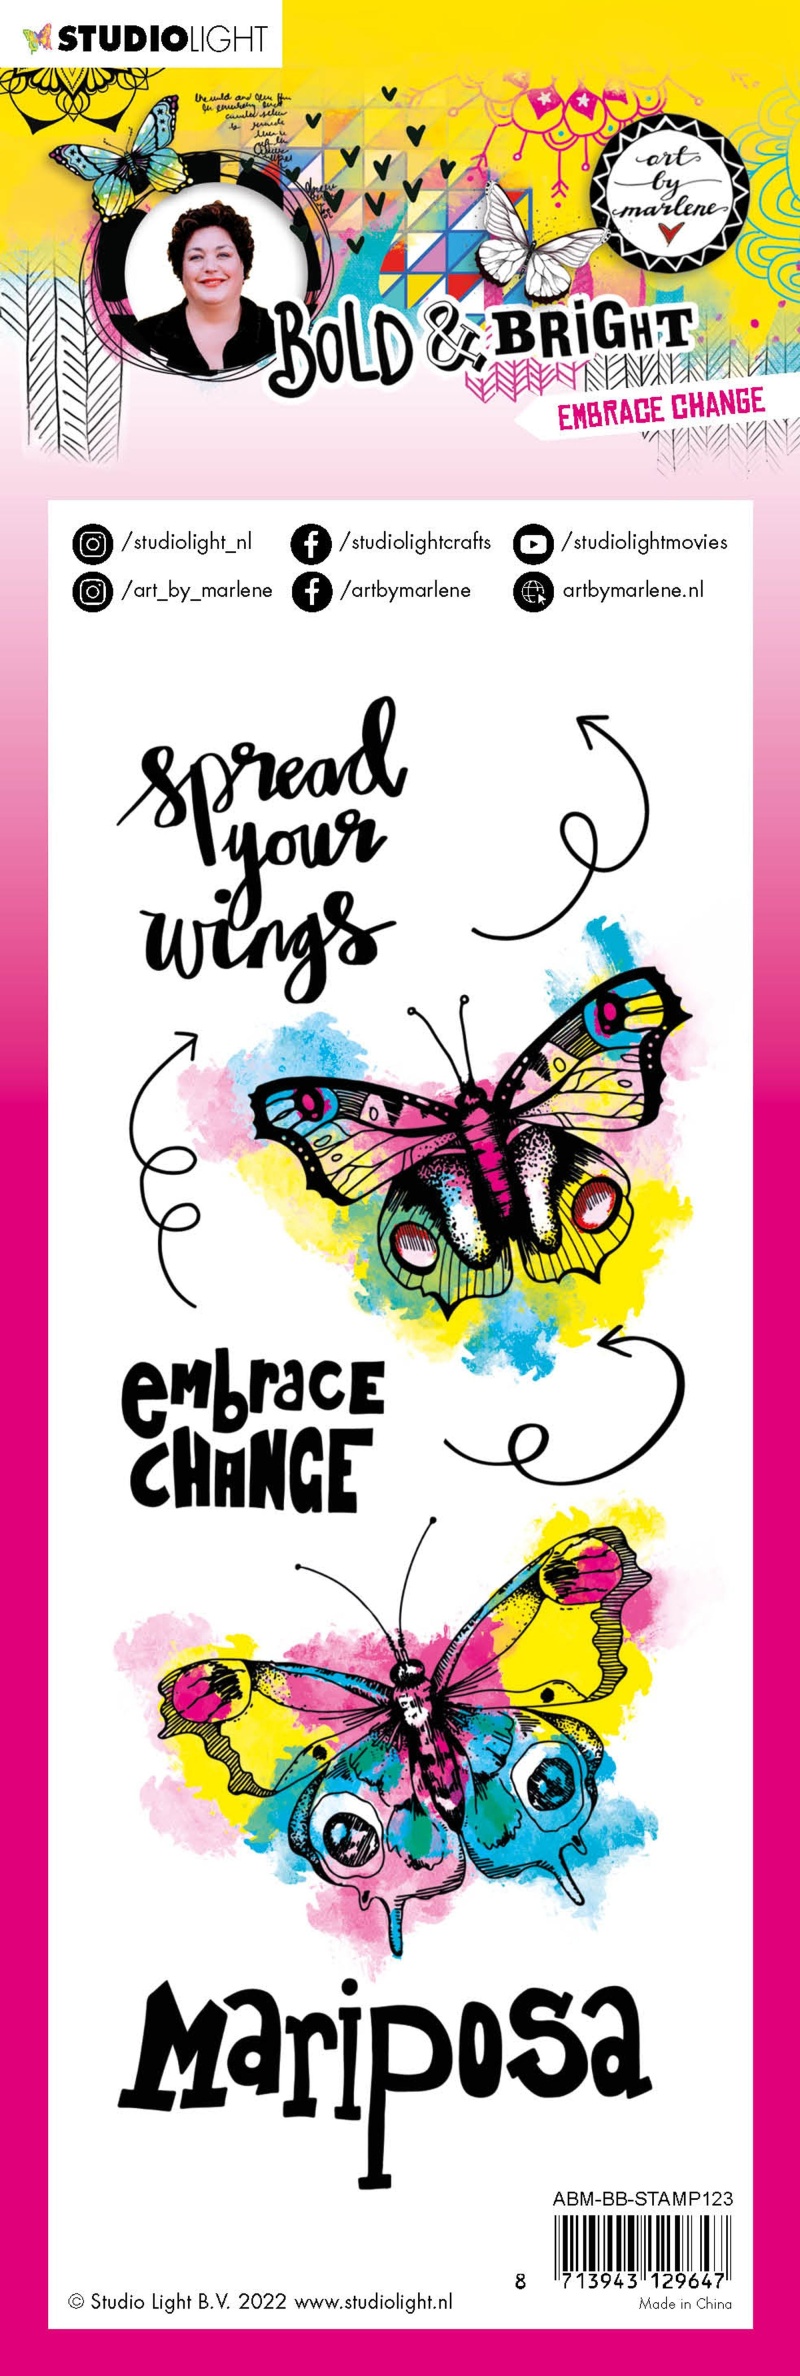 Abm Clear Stamp Embrace Change Bold & Bright 100X240x3mm 1 Pc Nr.123